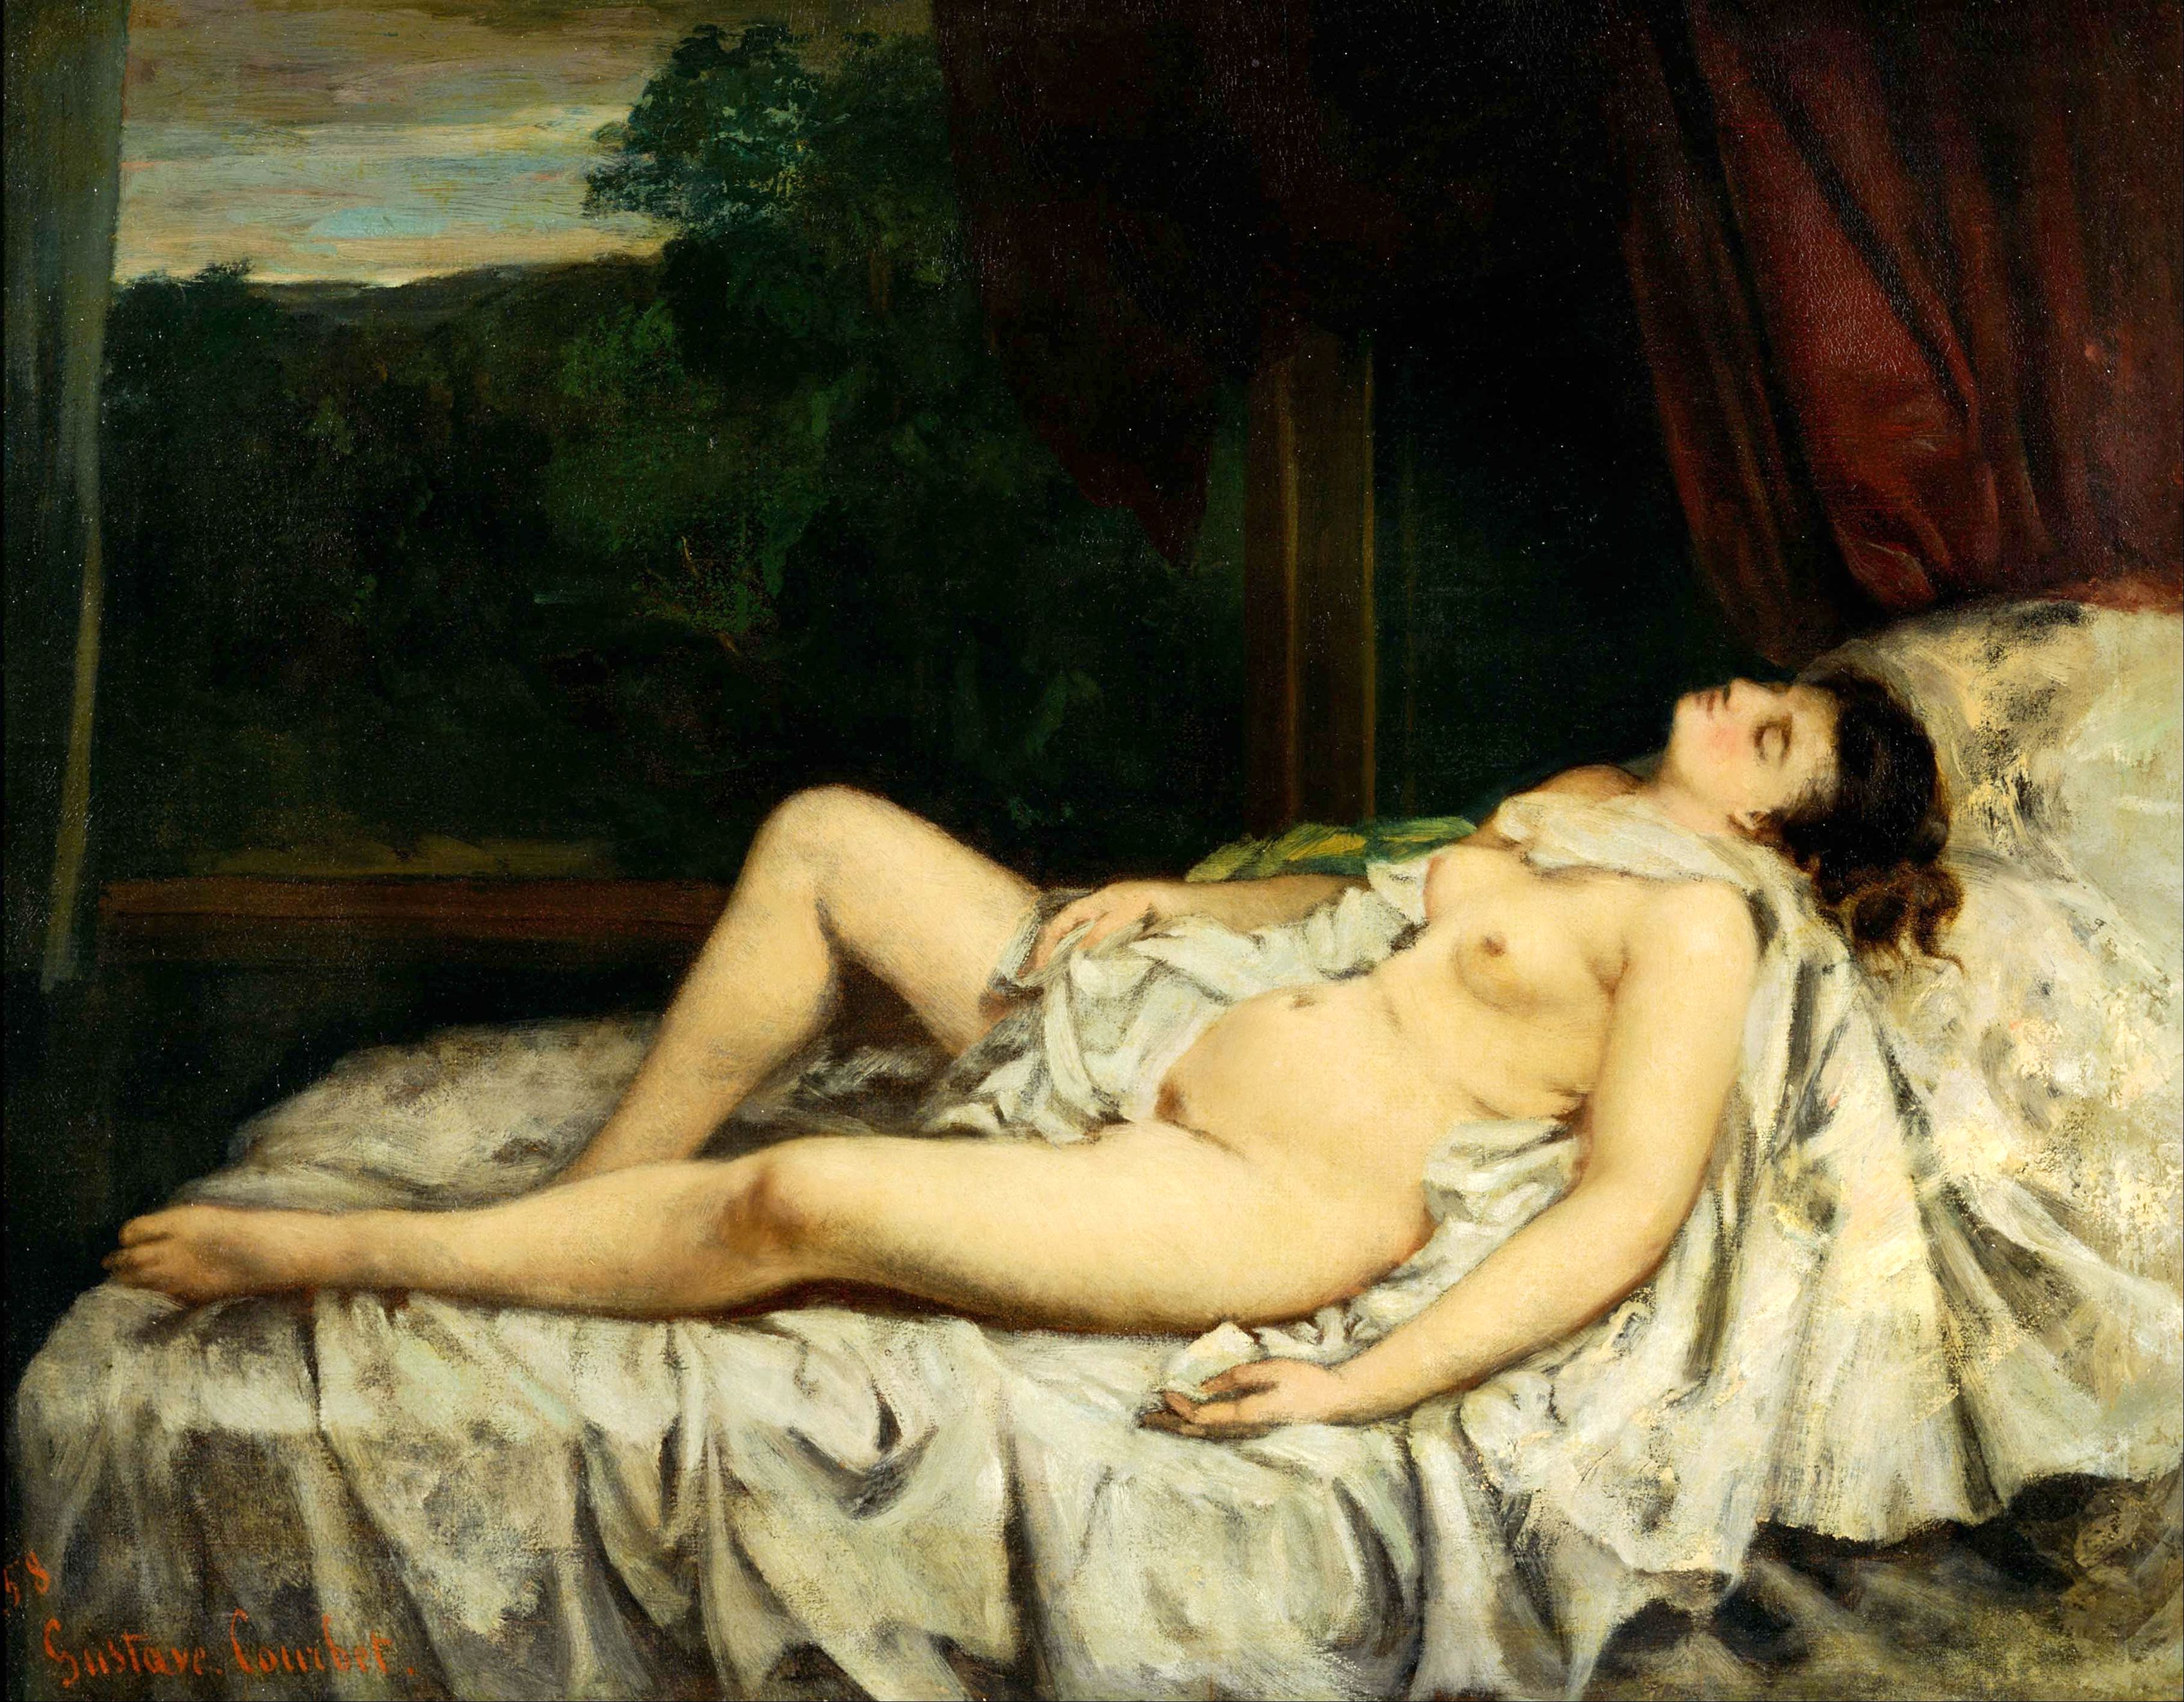 Important Pieces of Nude Artwork - Most Famous Nude Art Pieces of All Time